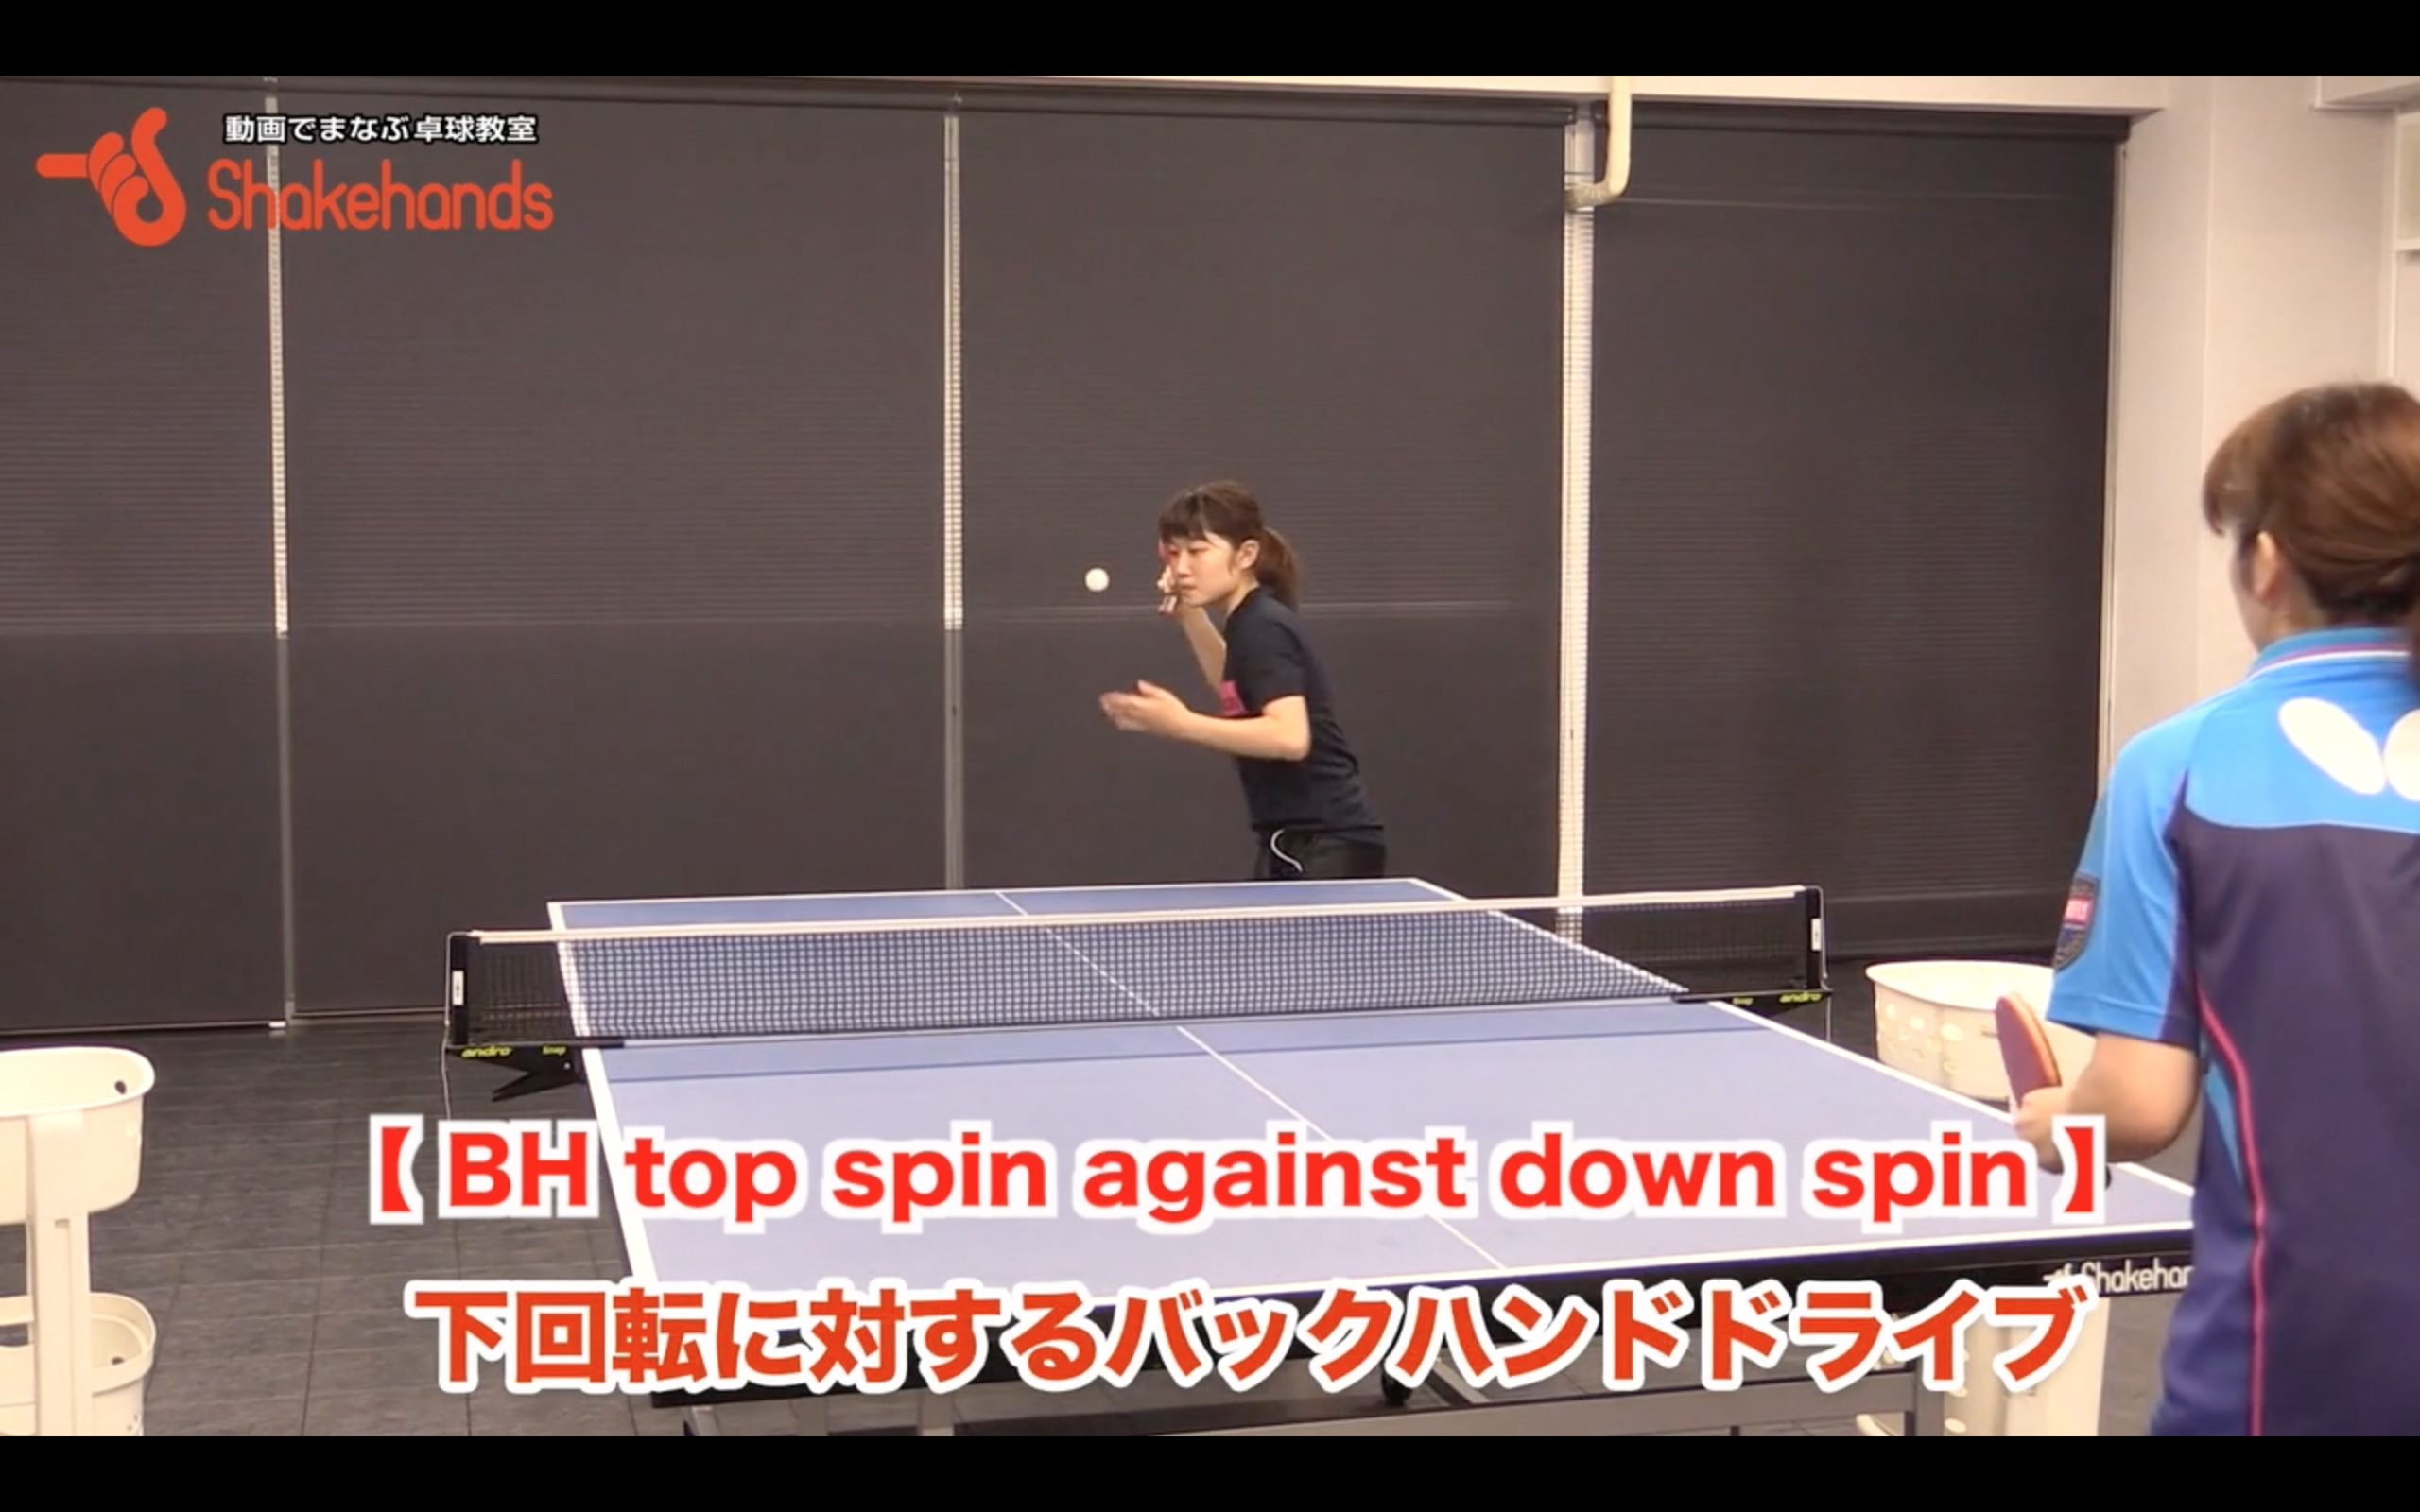 BH top spin against down spin